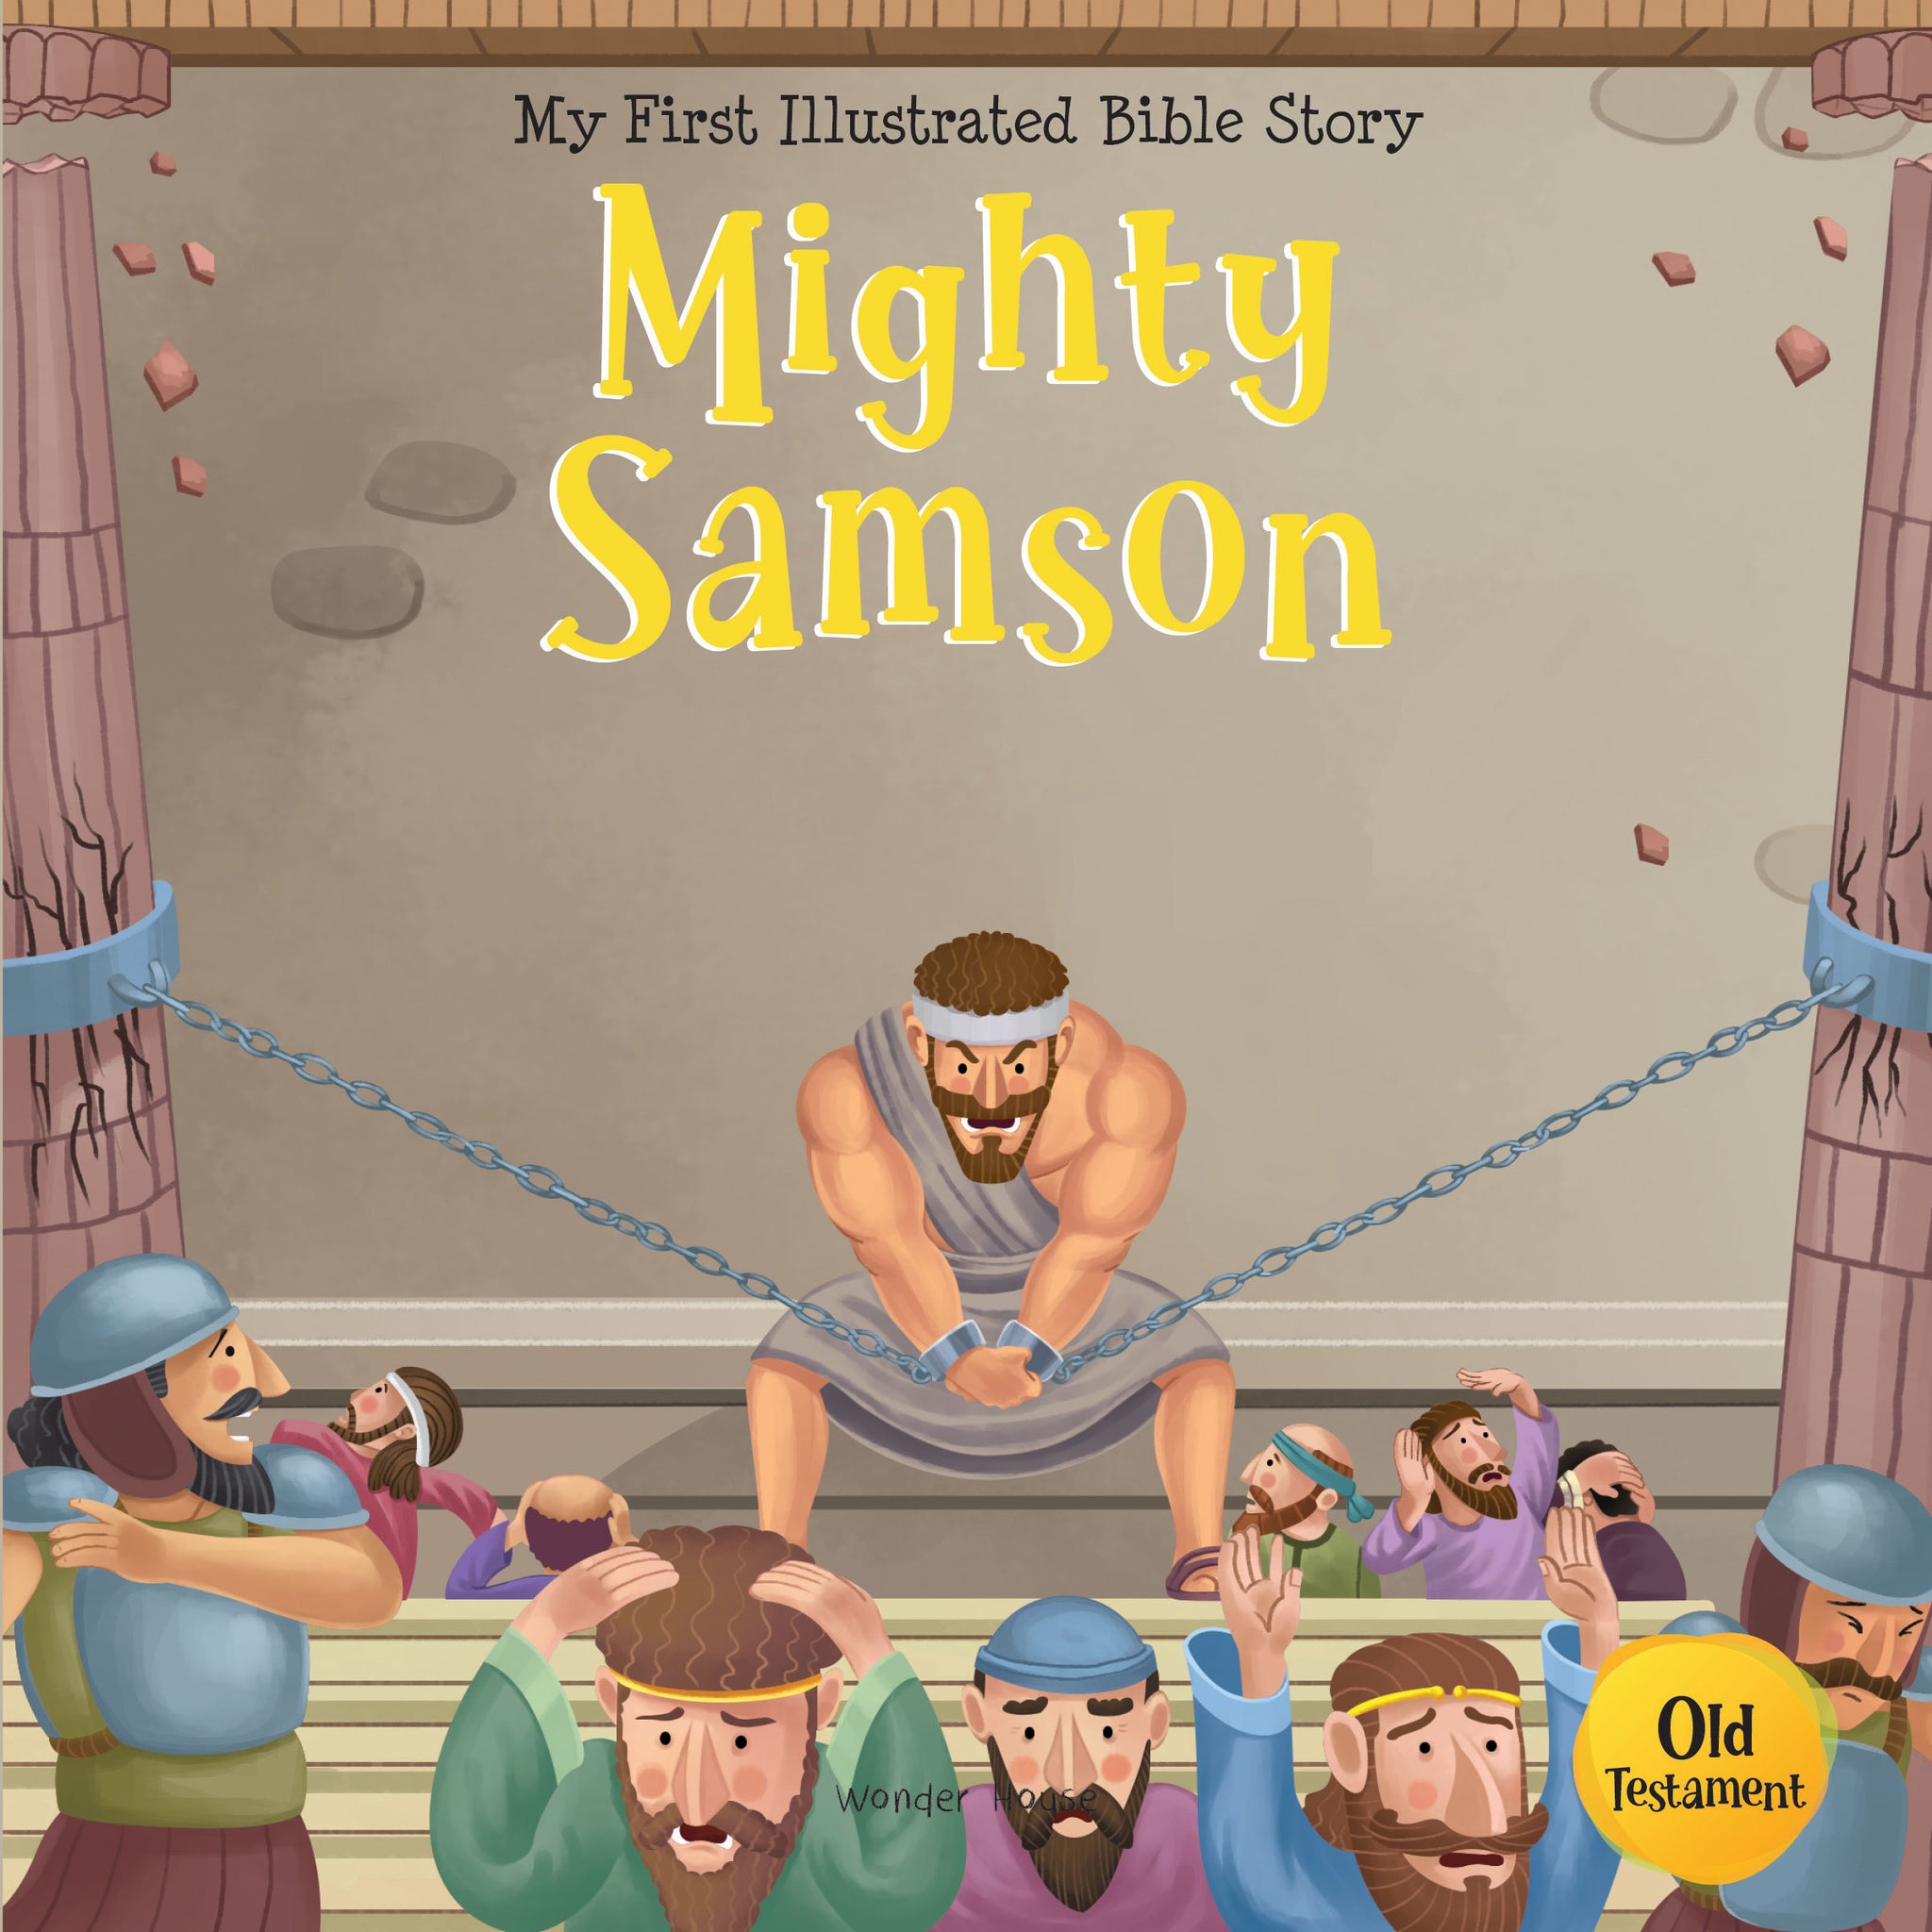 My First Illustrated Bible Story: Mighty Samson